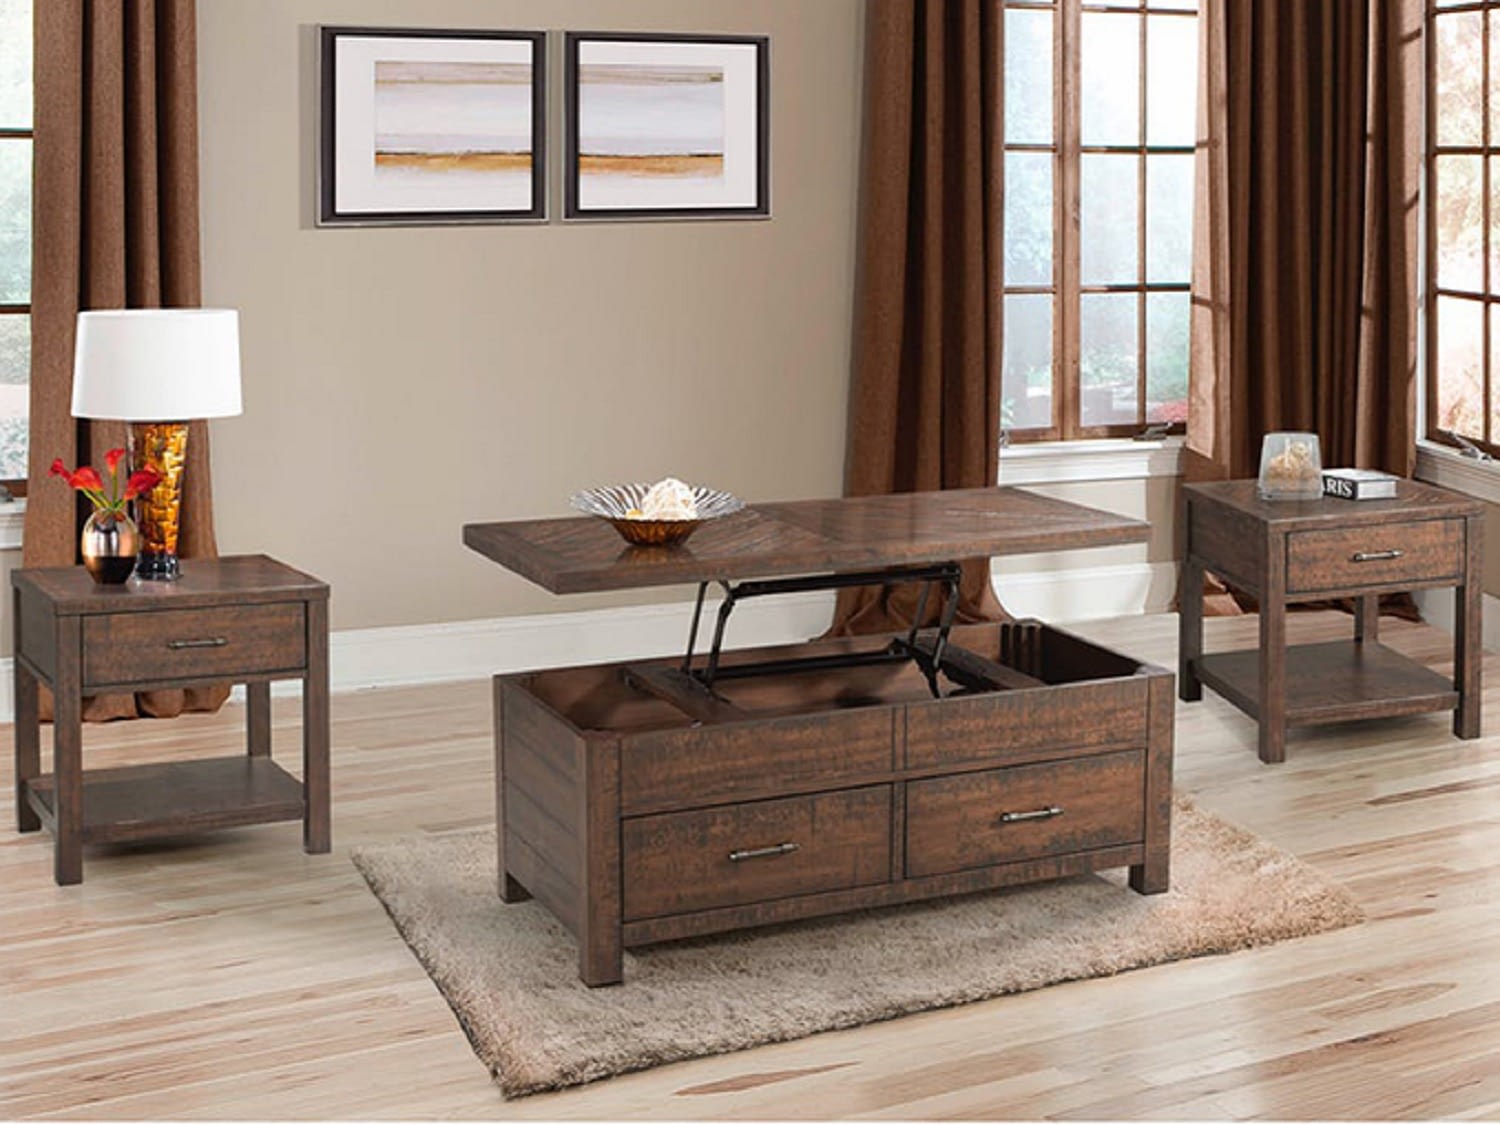 BECON Lift-Top Coffee Table Set